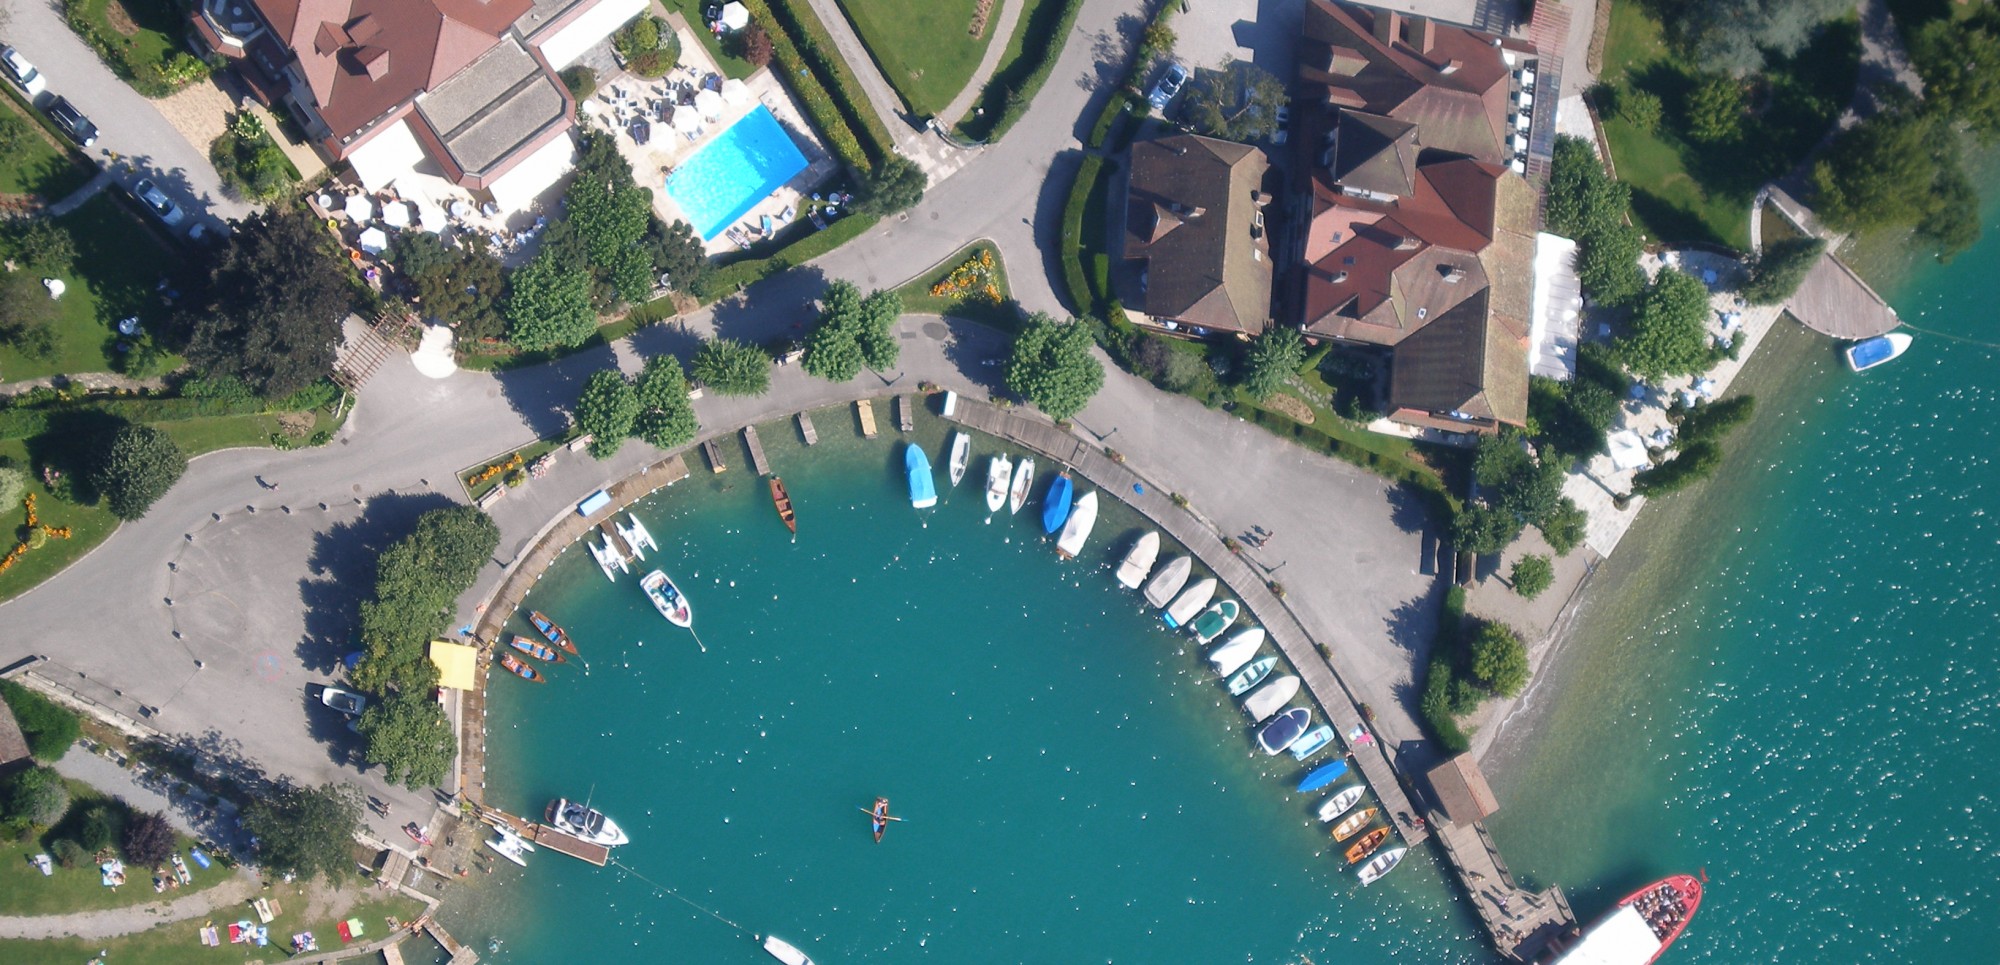 Looking down on the little lakeside village of Talloires